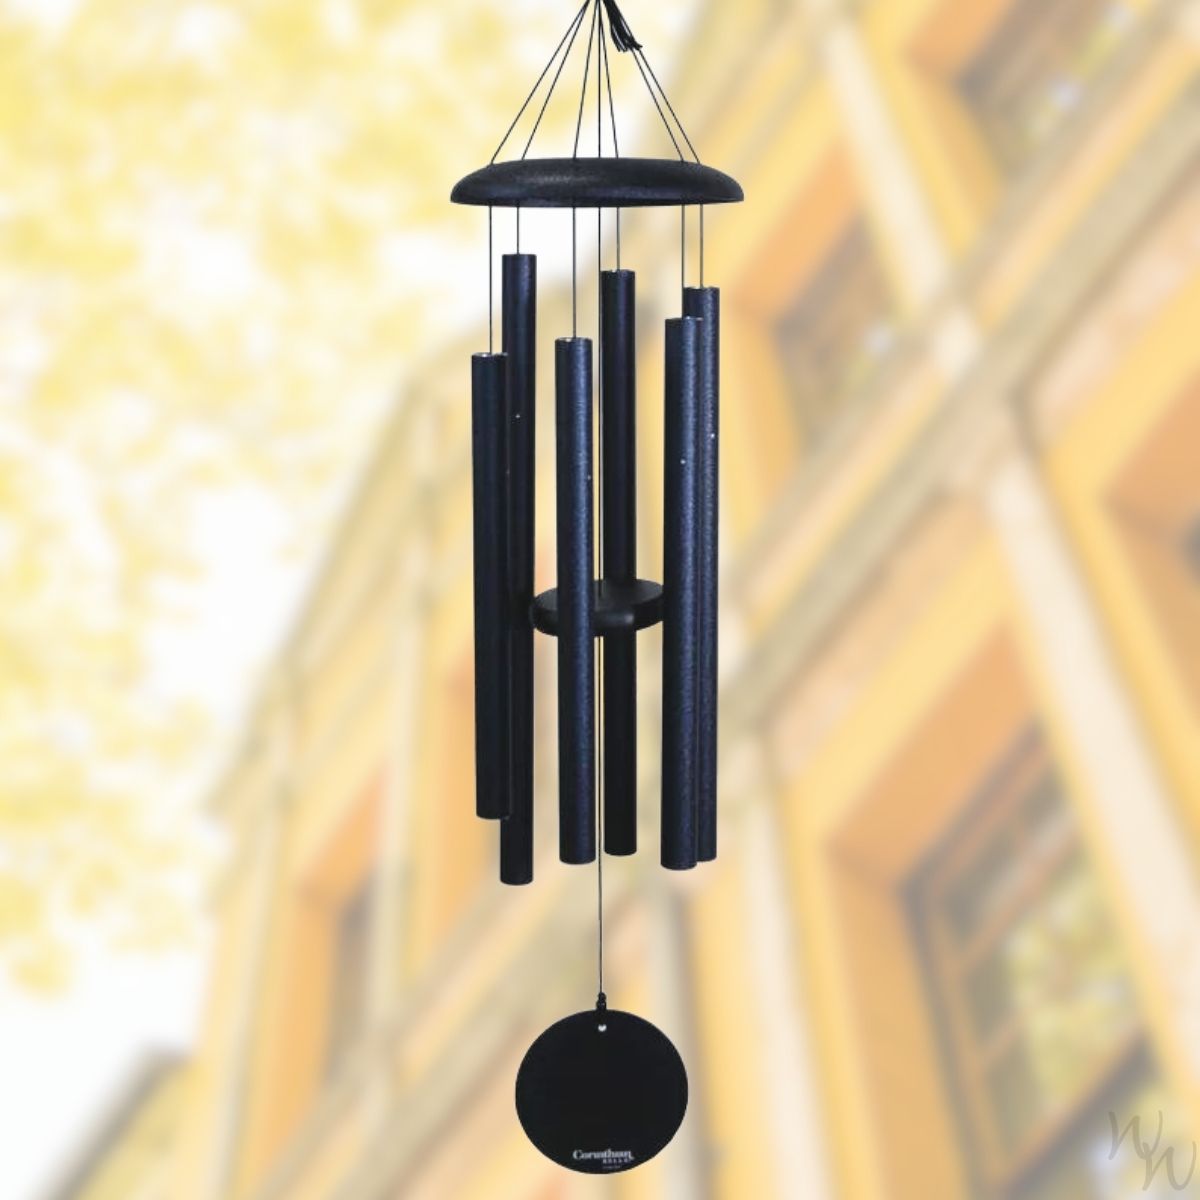 Corinthian Bells 36 Inch Midnight Blue Wind Chime - Scale Of E